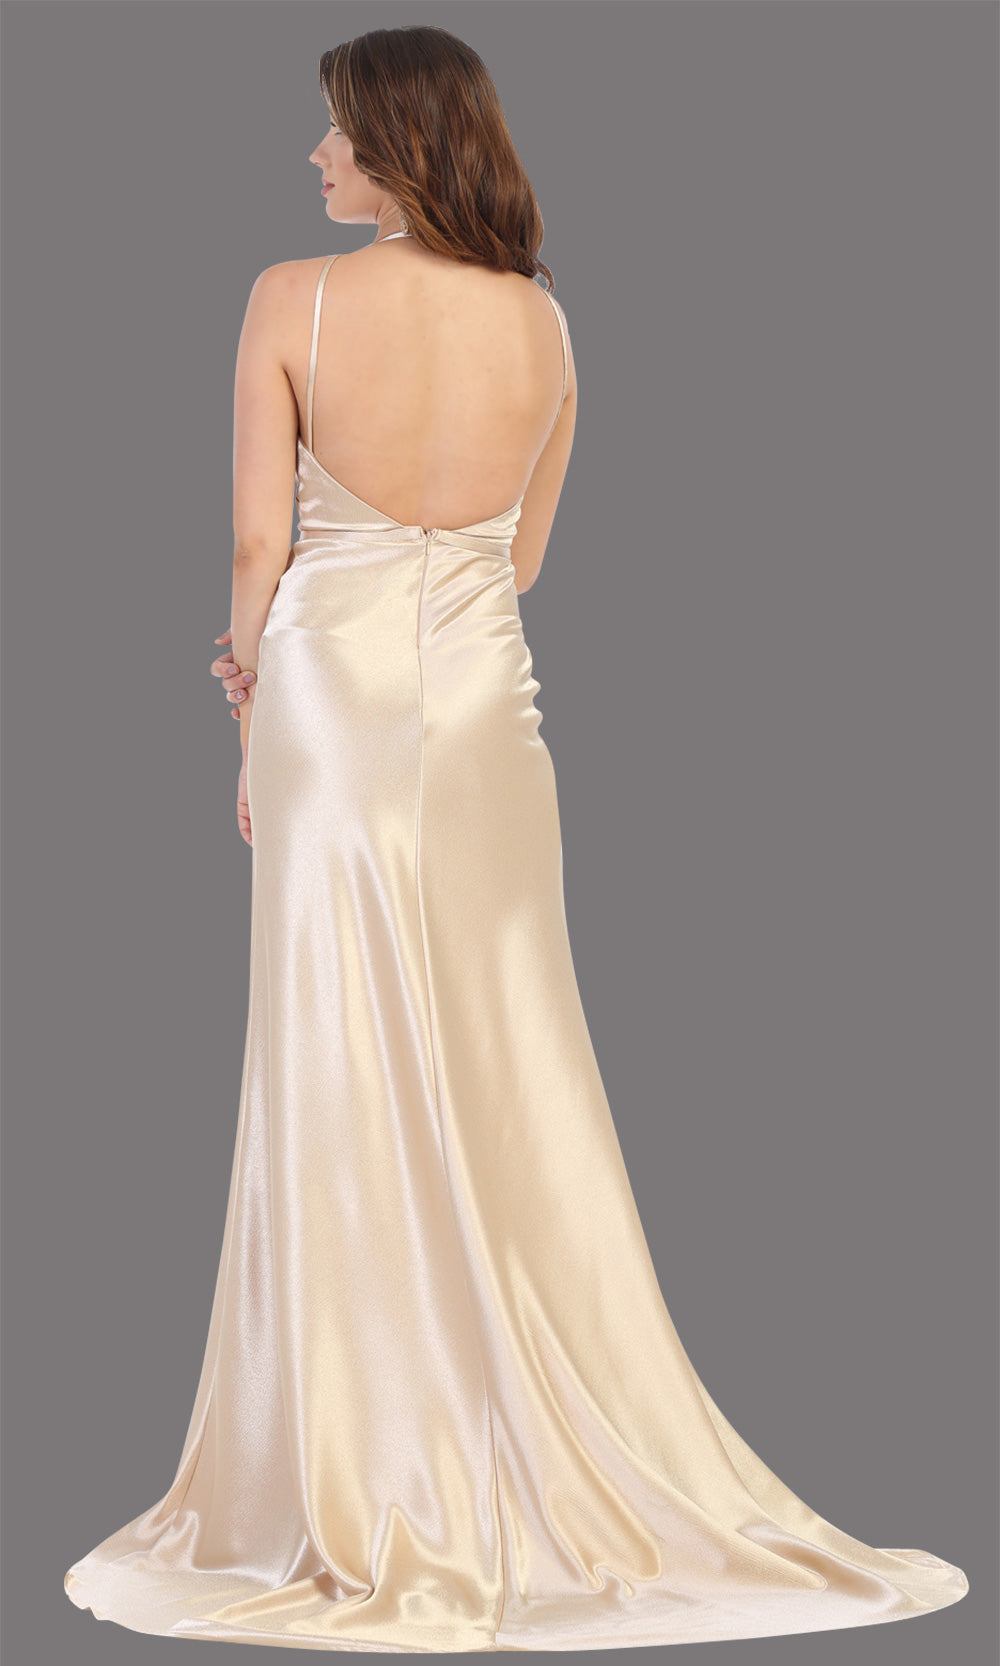 Mayqueen MQ1727 long champagne satin dress w/high slit, halter neck, & open back. This light gold dress is perfect for bridesmaid dresses, wedding guest dress, engagement/e-shoot dress, wedding reception dress, gala, black tie event.Plus sizes avail-b